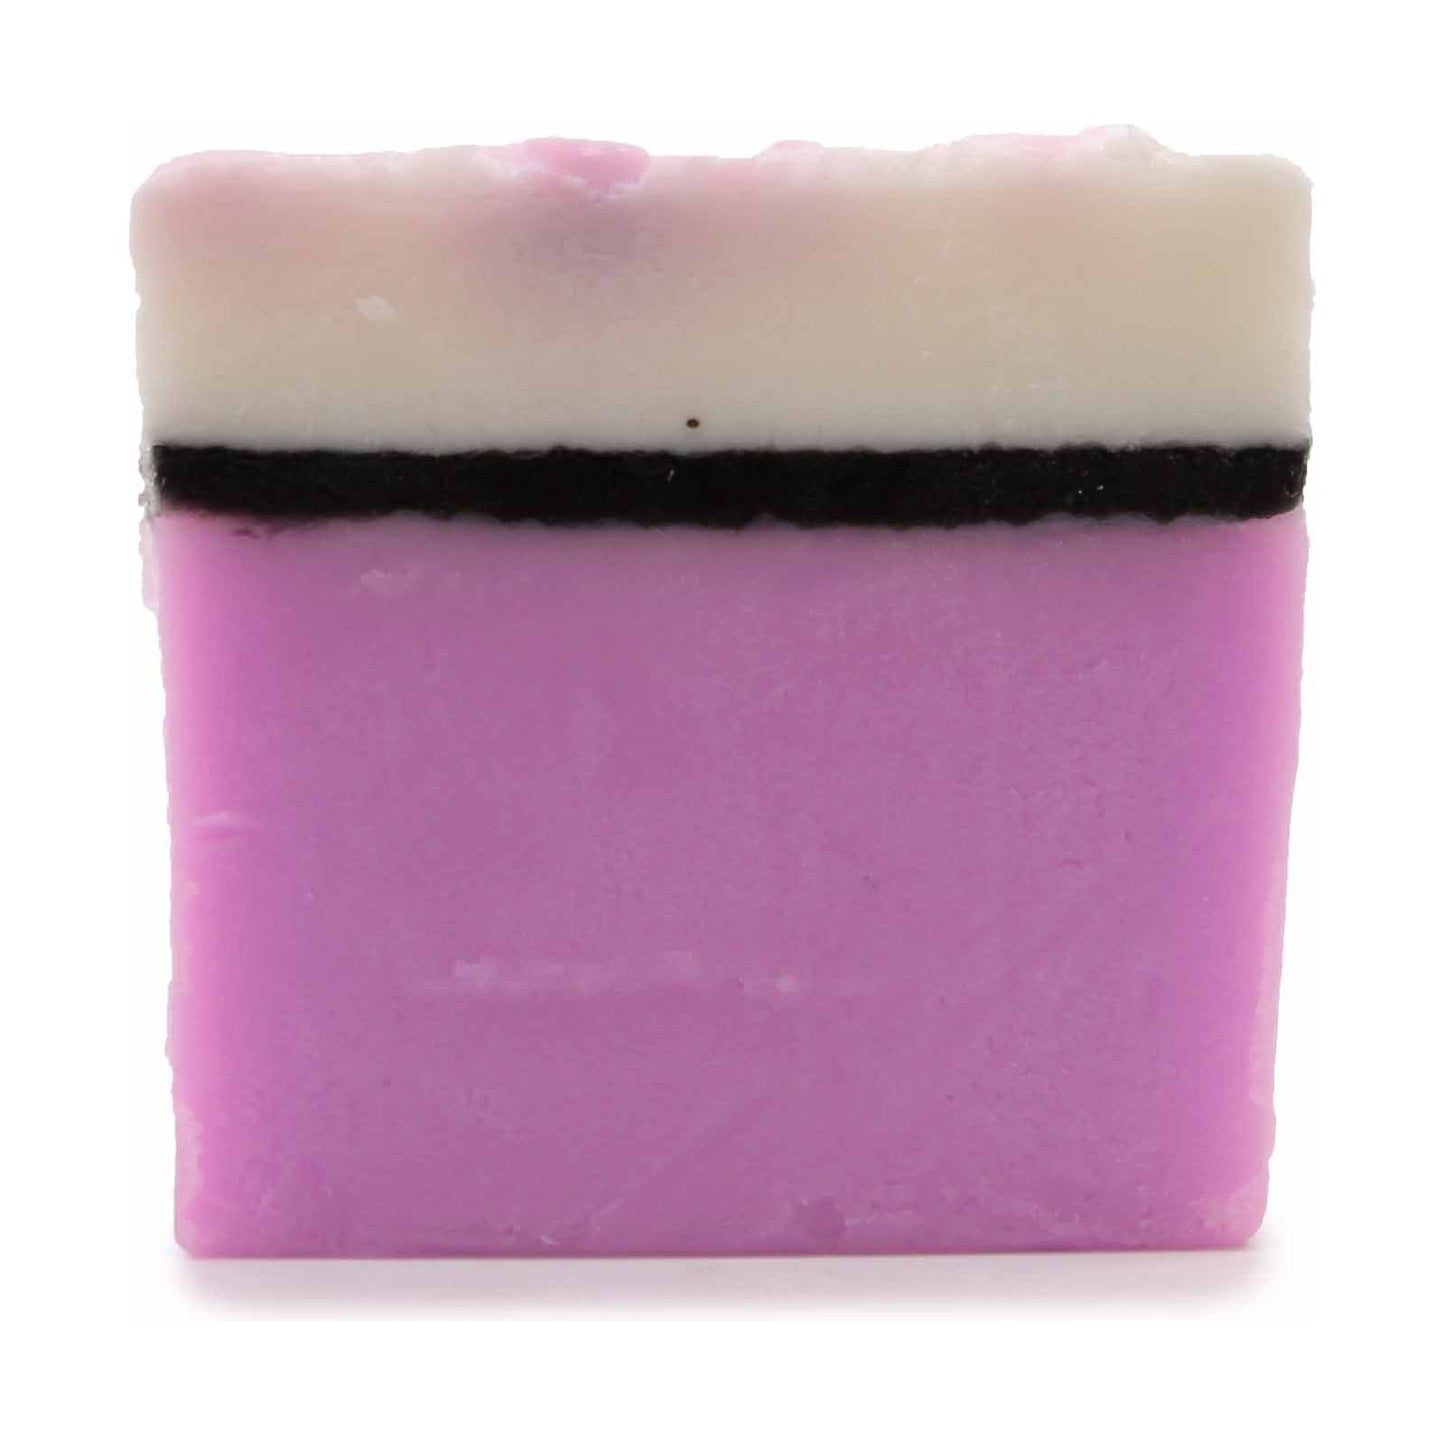 Funky Soap - Parma Violet - Slice Approx 115g - Ashton and Finch